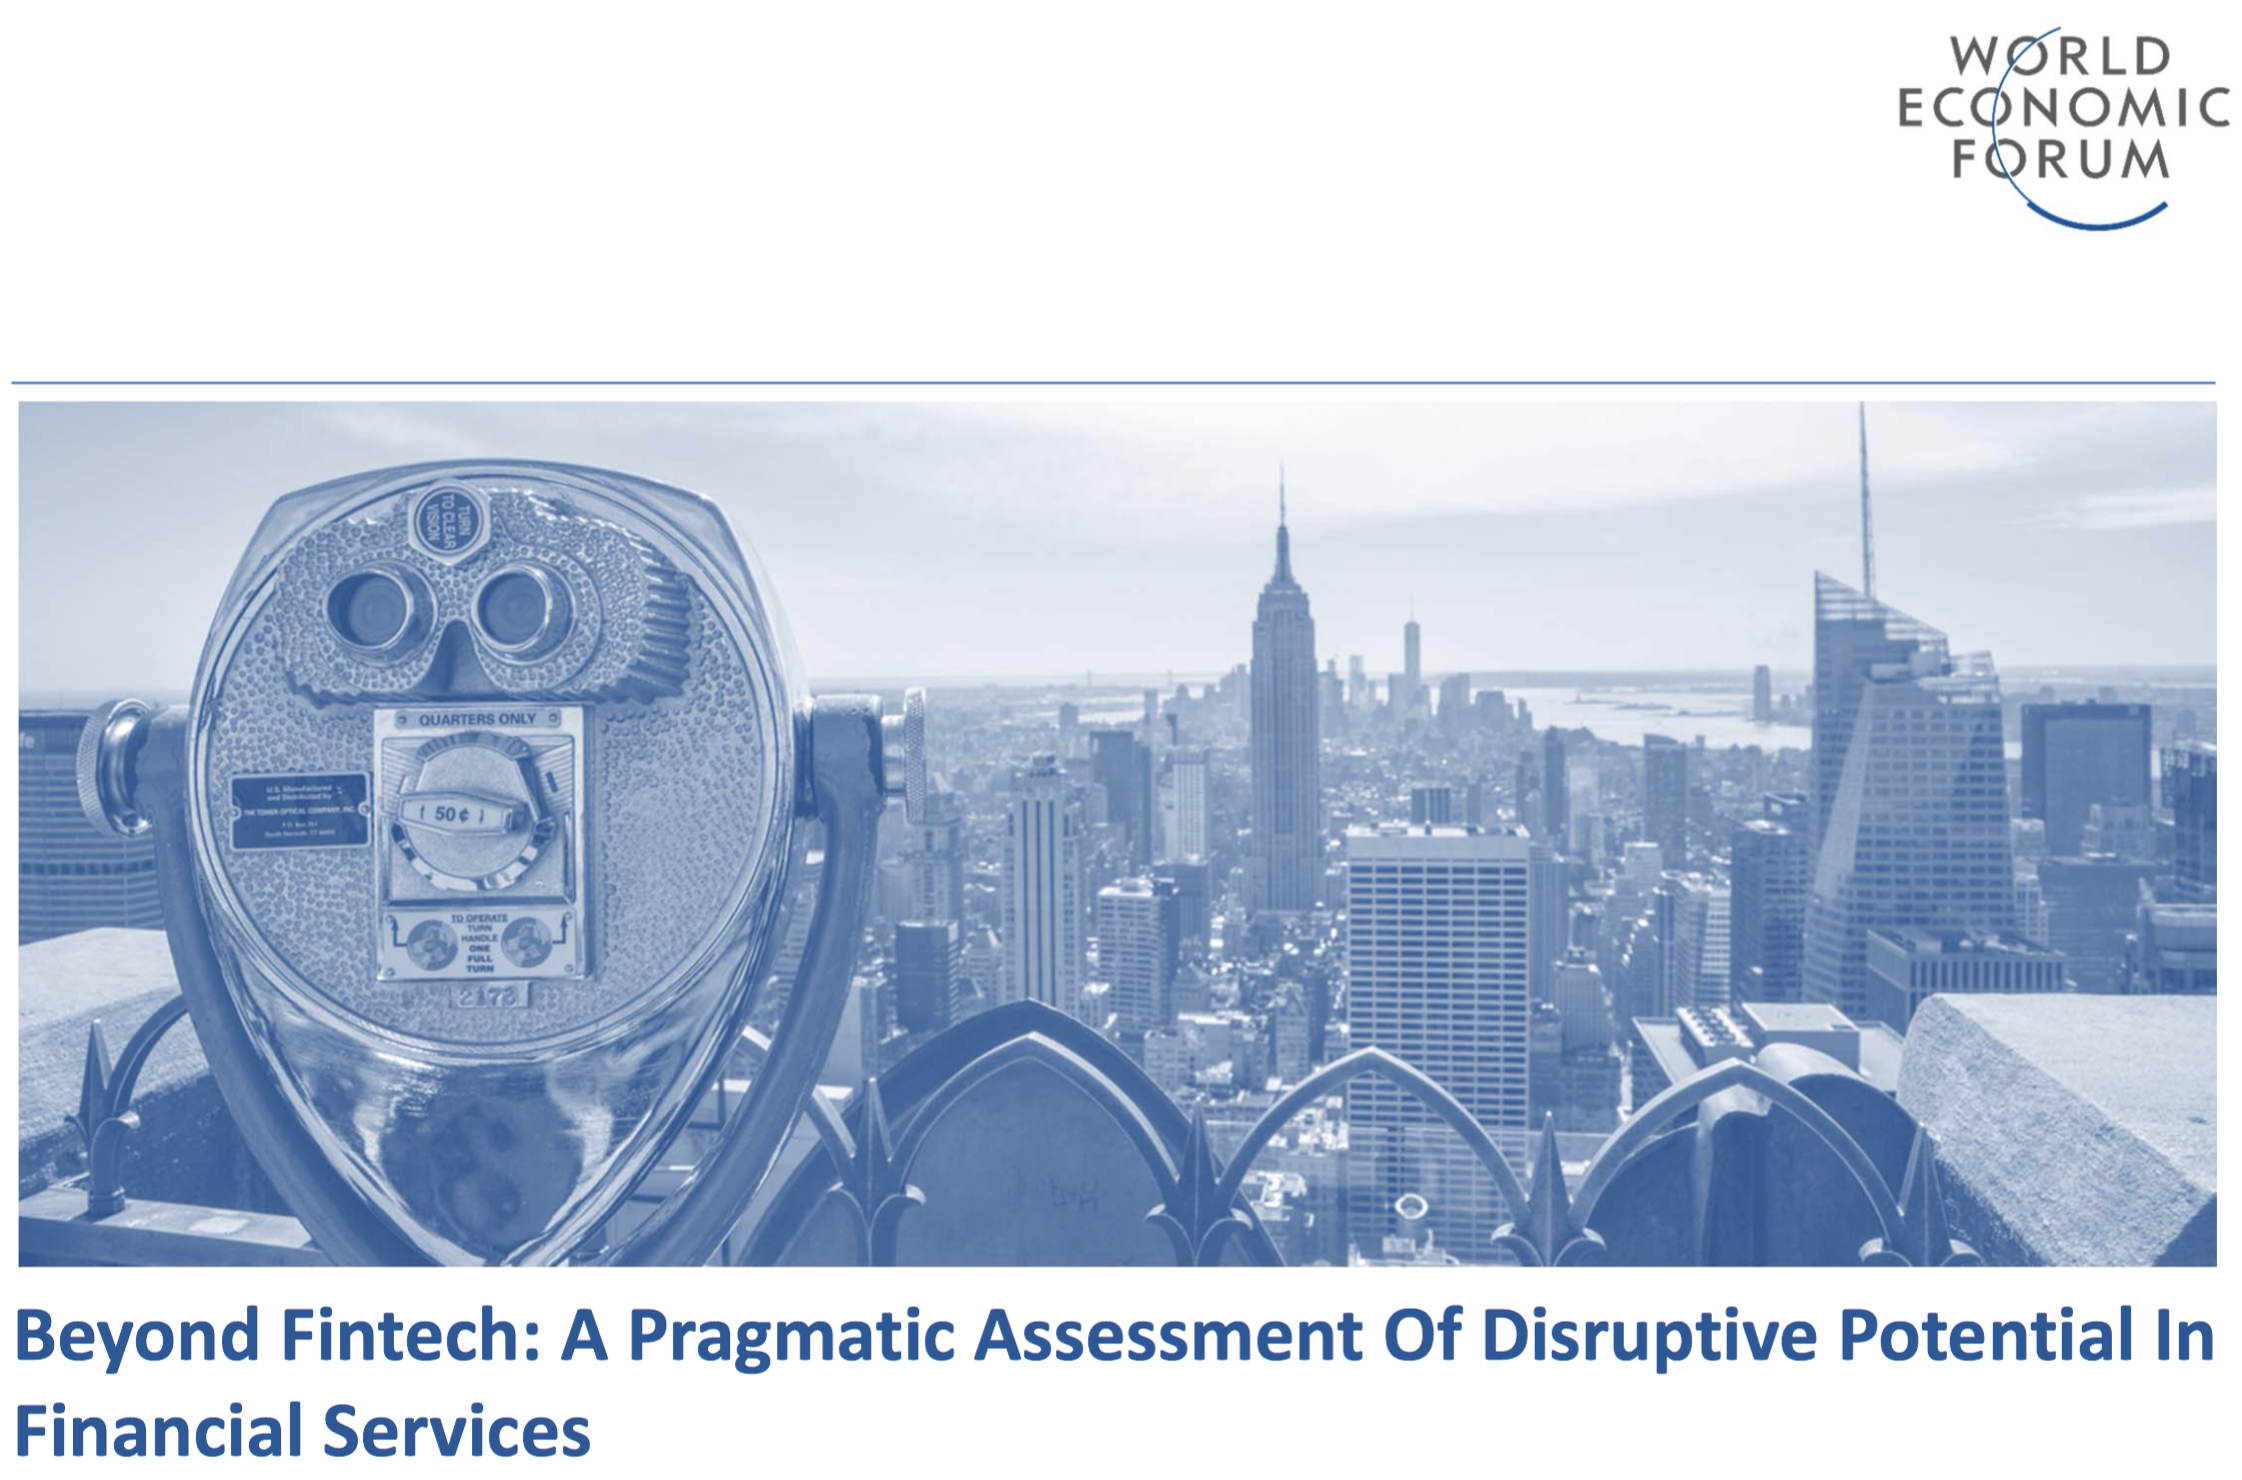 Beyond Fintech: A Pragmatic Assessment Of Disruptive Potential In Financial Services